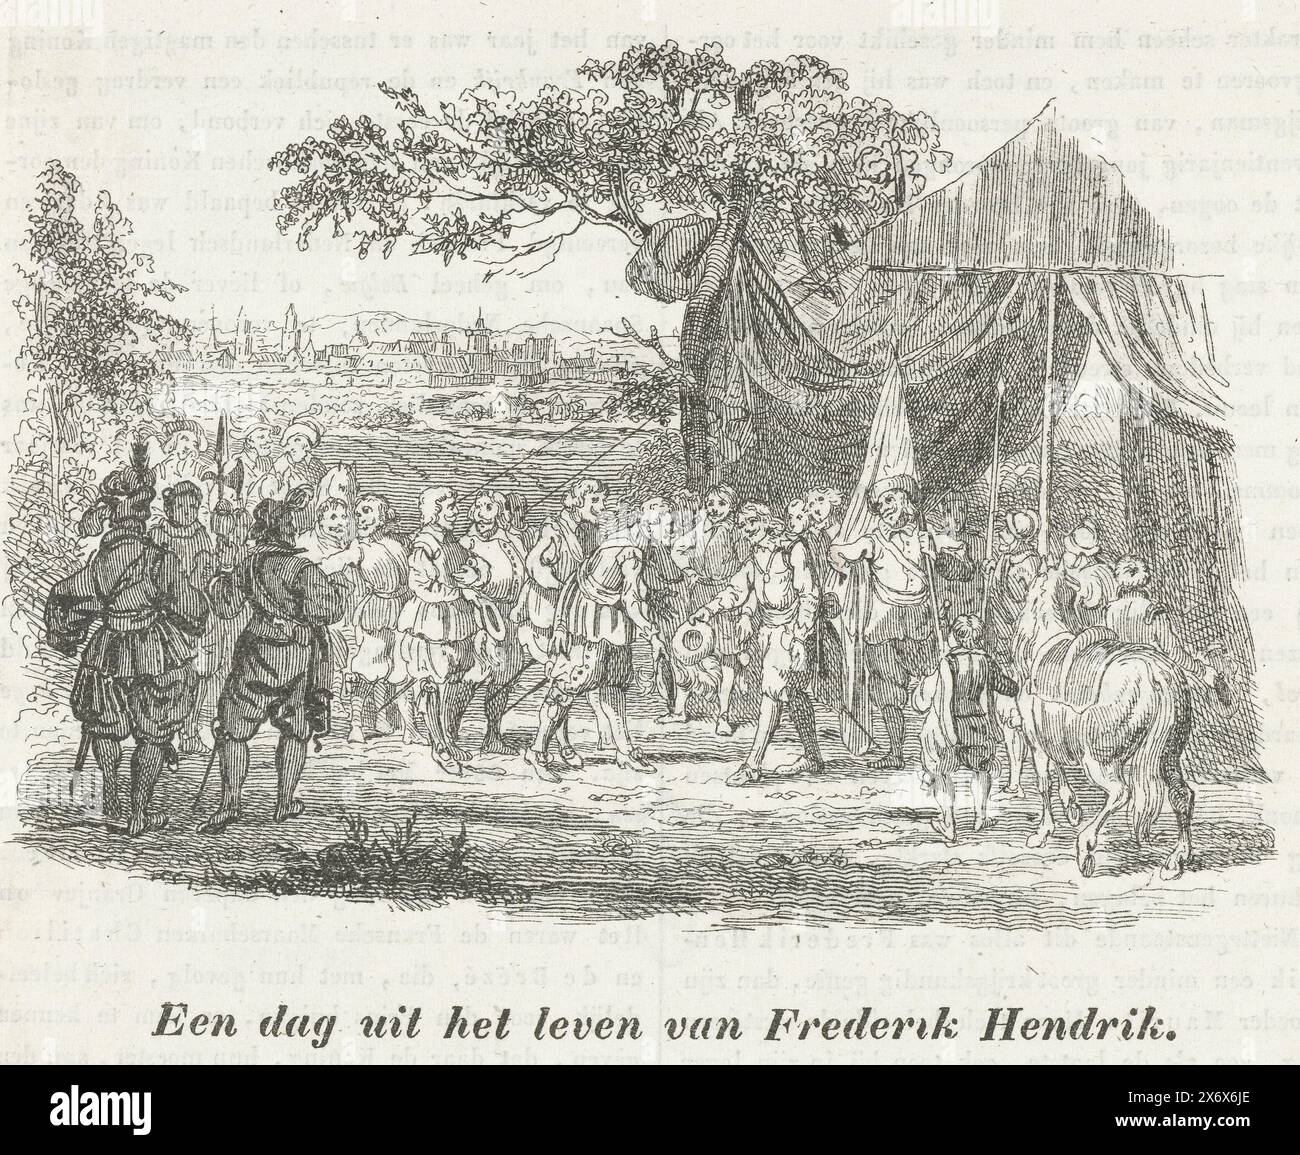 Frederik Hendrik is greeted as a general in the French army, 1635, A day in the life of Frederik Hendrik (title on object), Stadtholder Frederik Hendrik is greeted as a general in the army camp of the French army, May 1635. Printed on the back with text in Dutch., print, print maker: anonymous, Netherlands, 1800 - 1899, paper, wood engraving, height, 116 mm × width, 145 mm Stock Photo